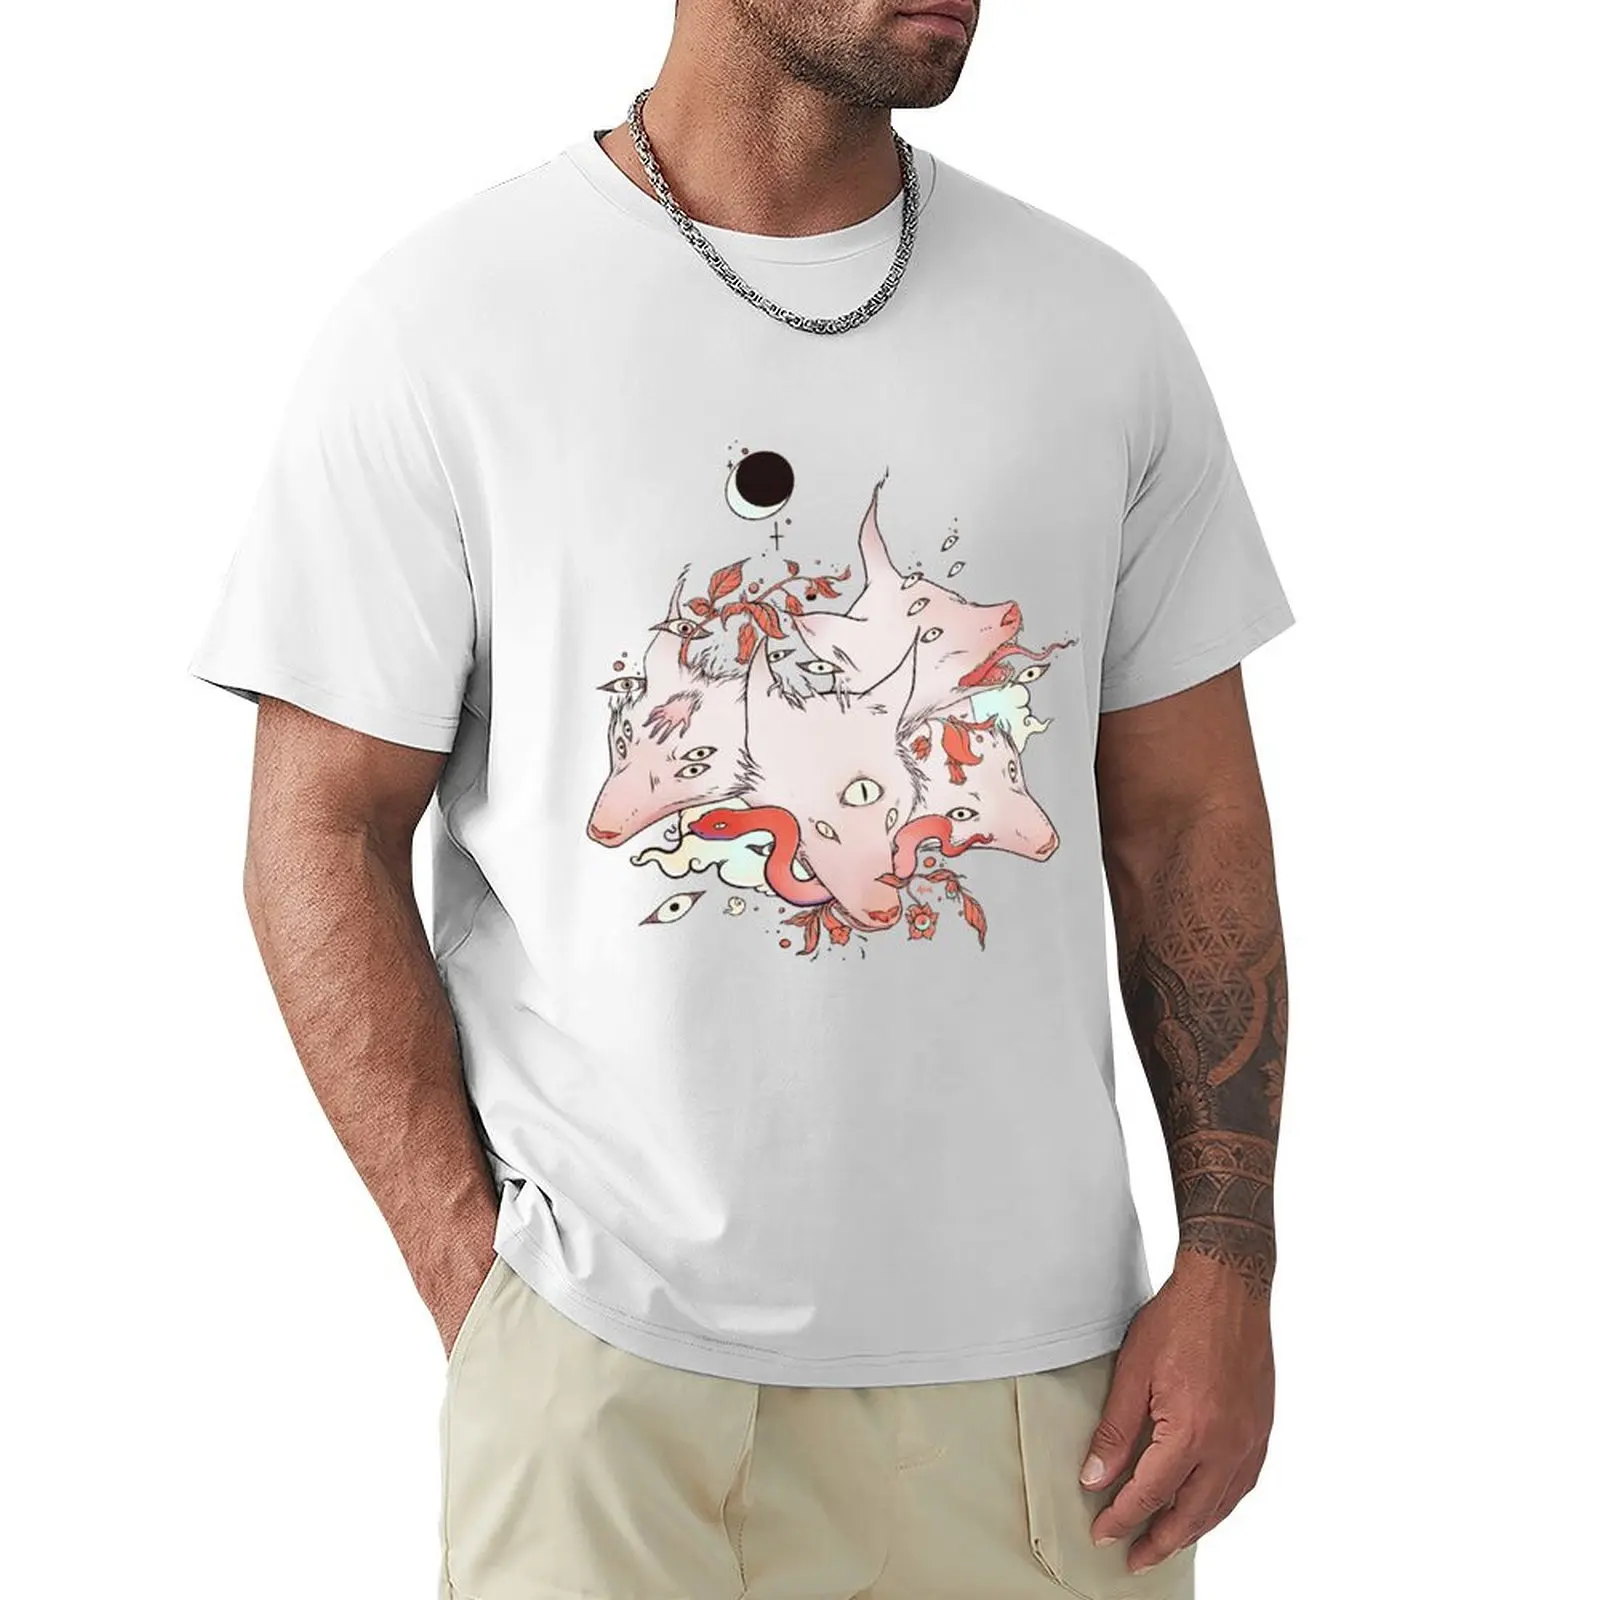 

Wolves, Leaves, Snake, And Nature Artwork T-Shirt vintage shirts graphic tees Men's t-shirts